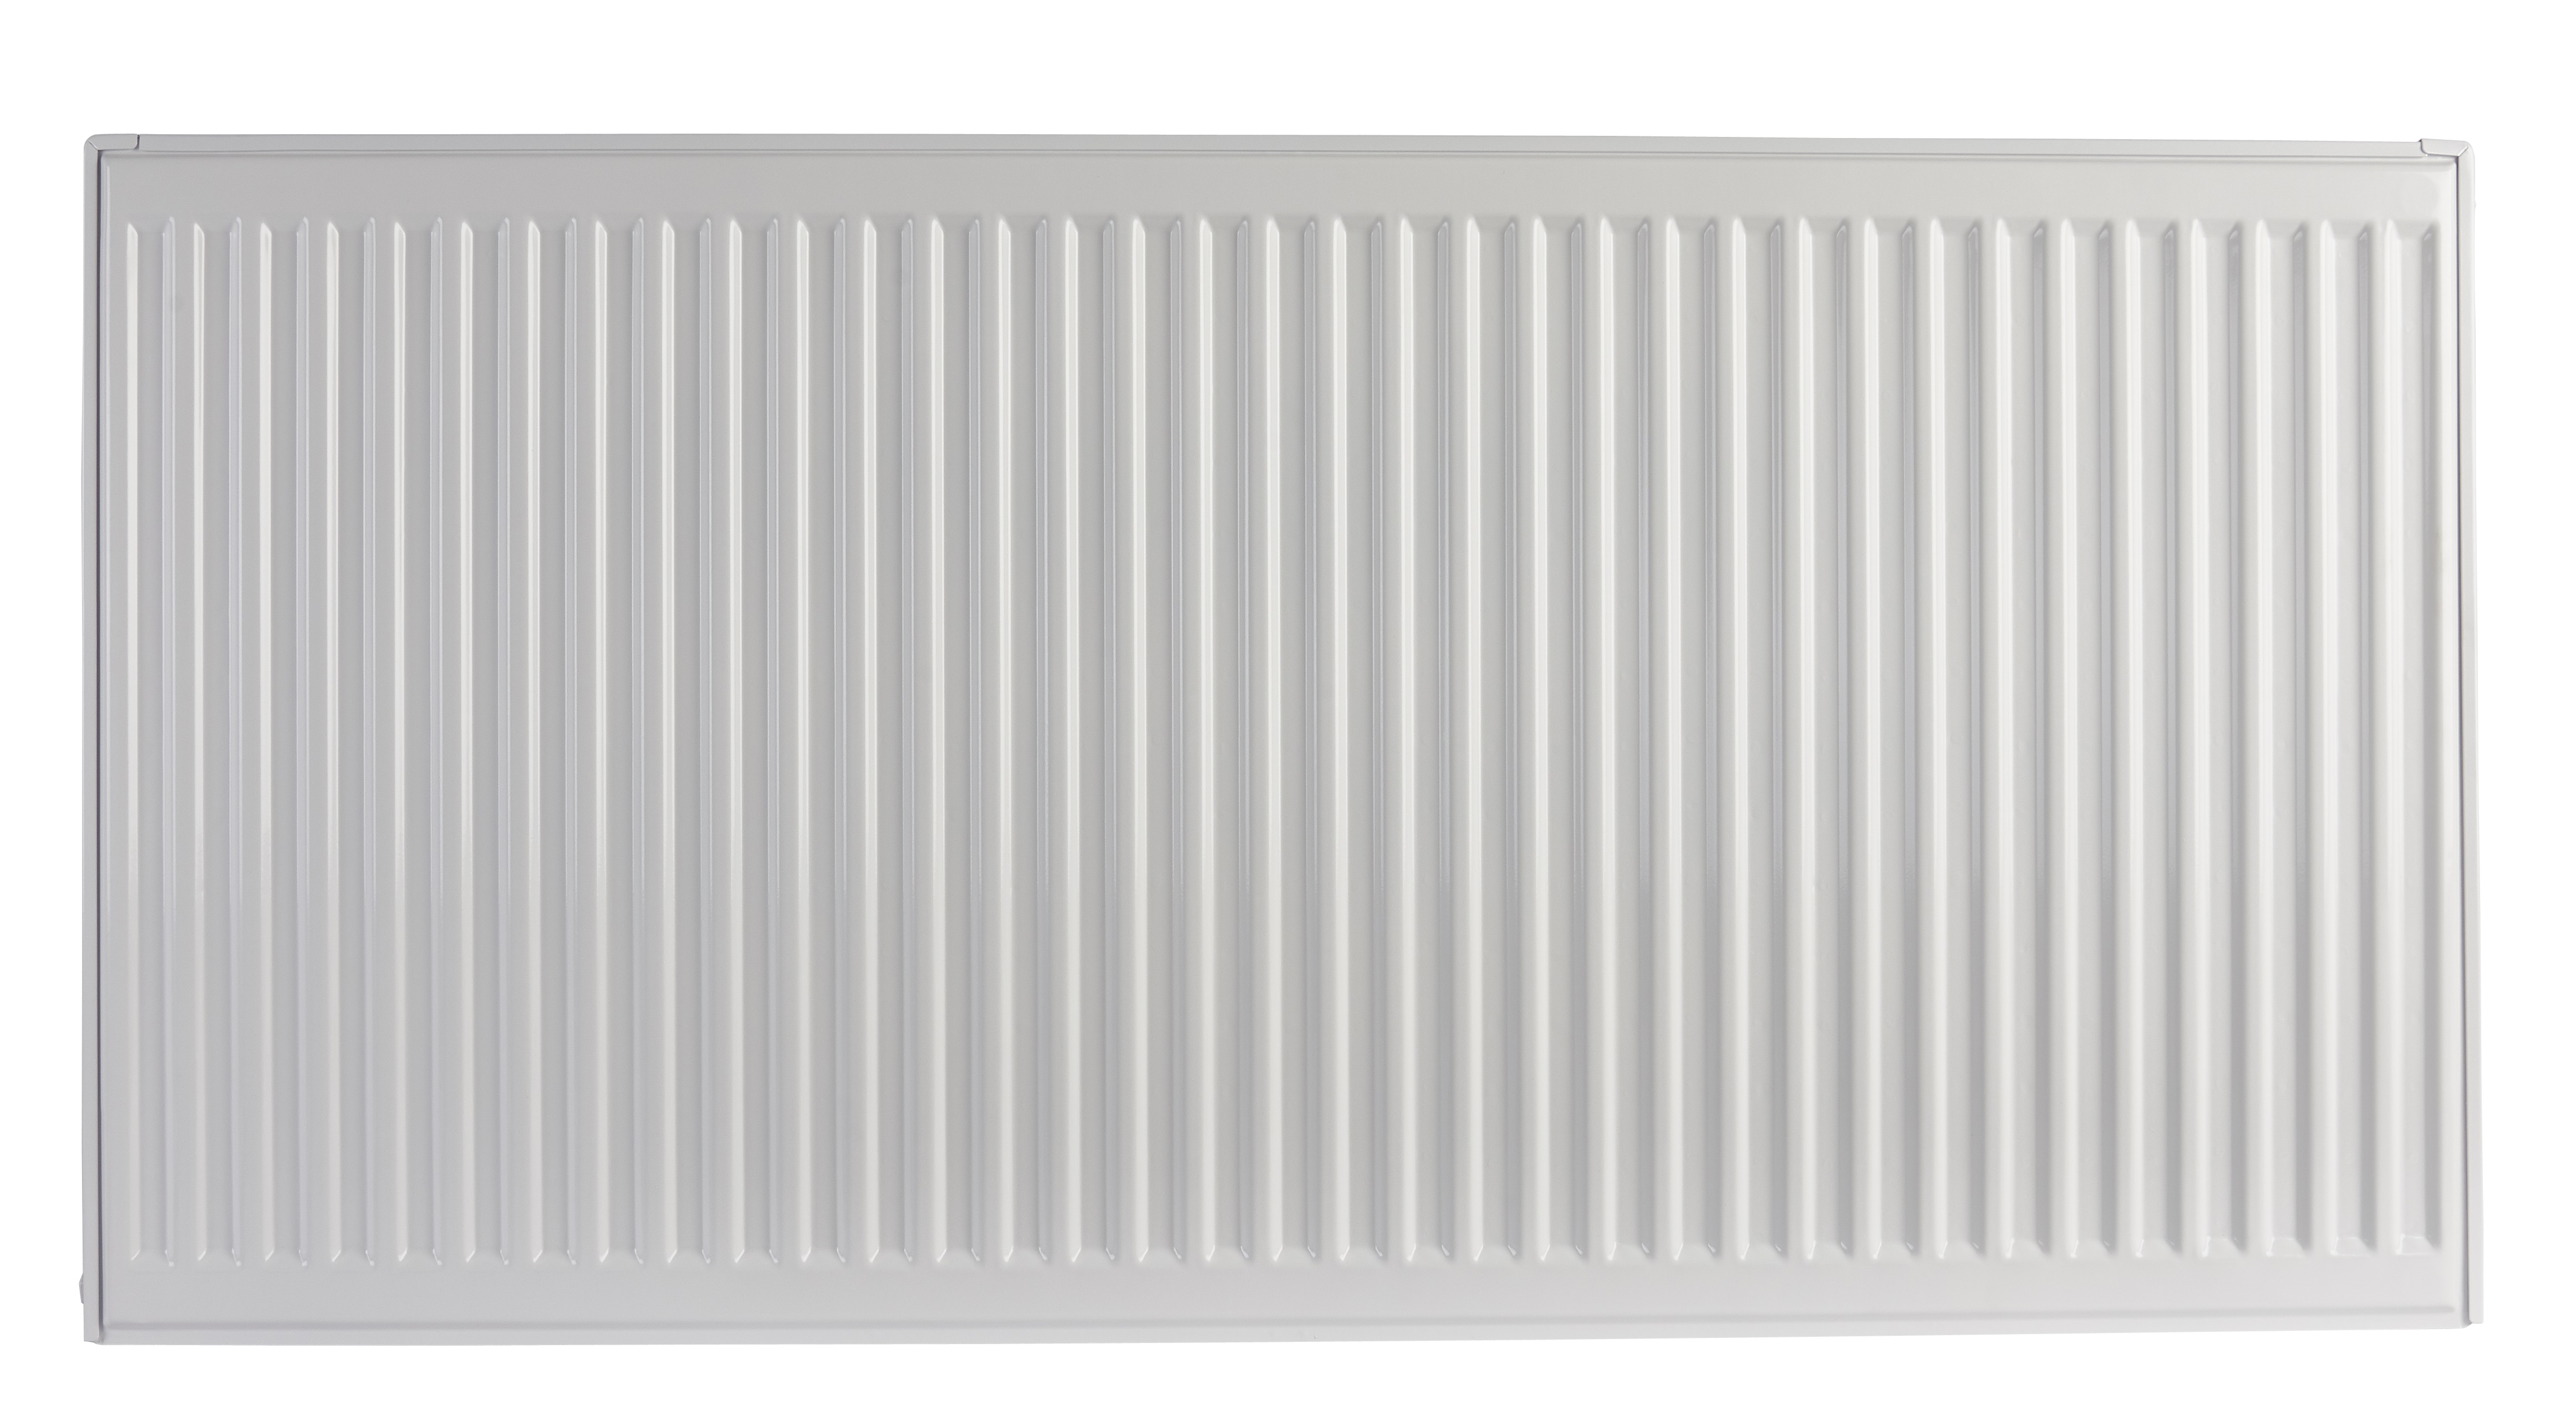 Homeline by Stelrad Type 21 Double Panel Plus Single Convector Radiator - 600 x 1800mm